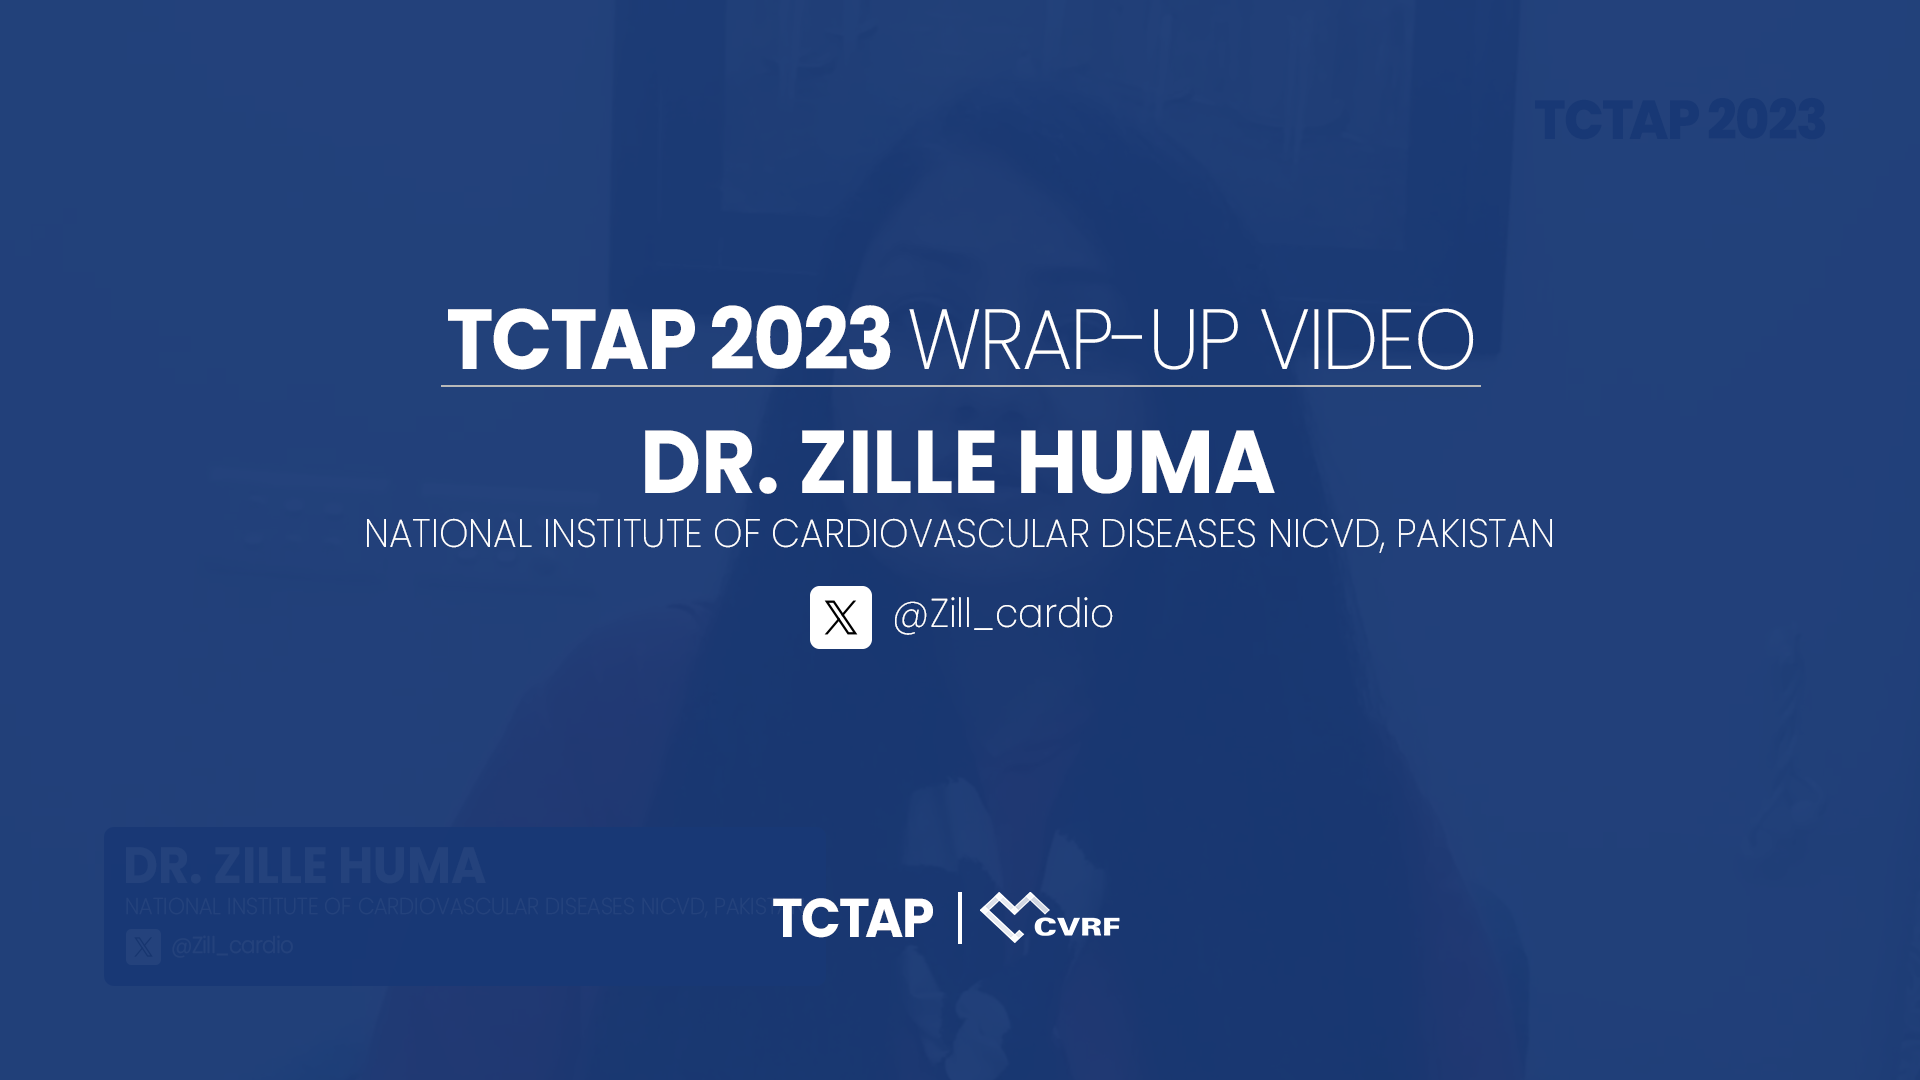 TCTAP 2023 Wrap-up Video from Dr. Zille Huma